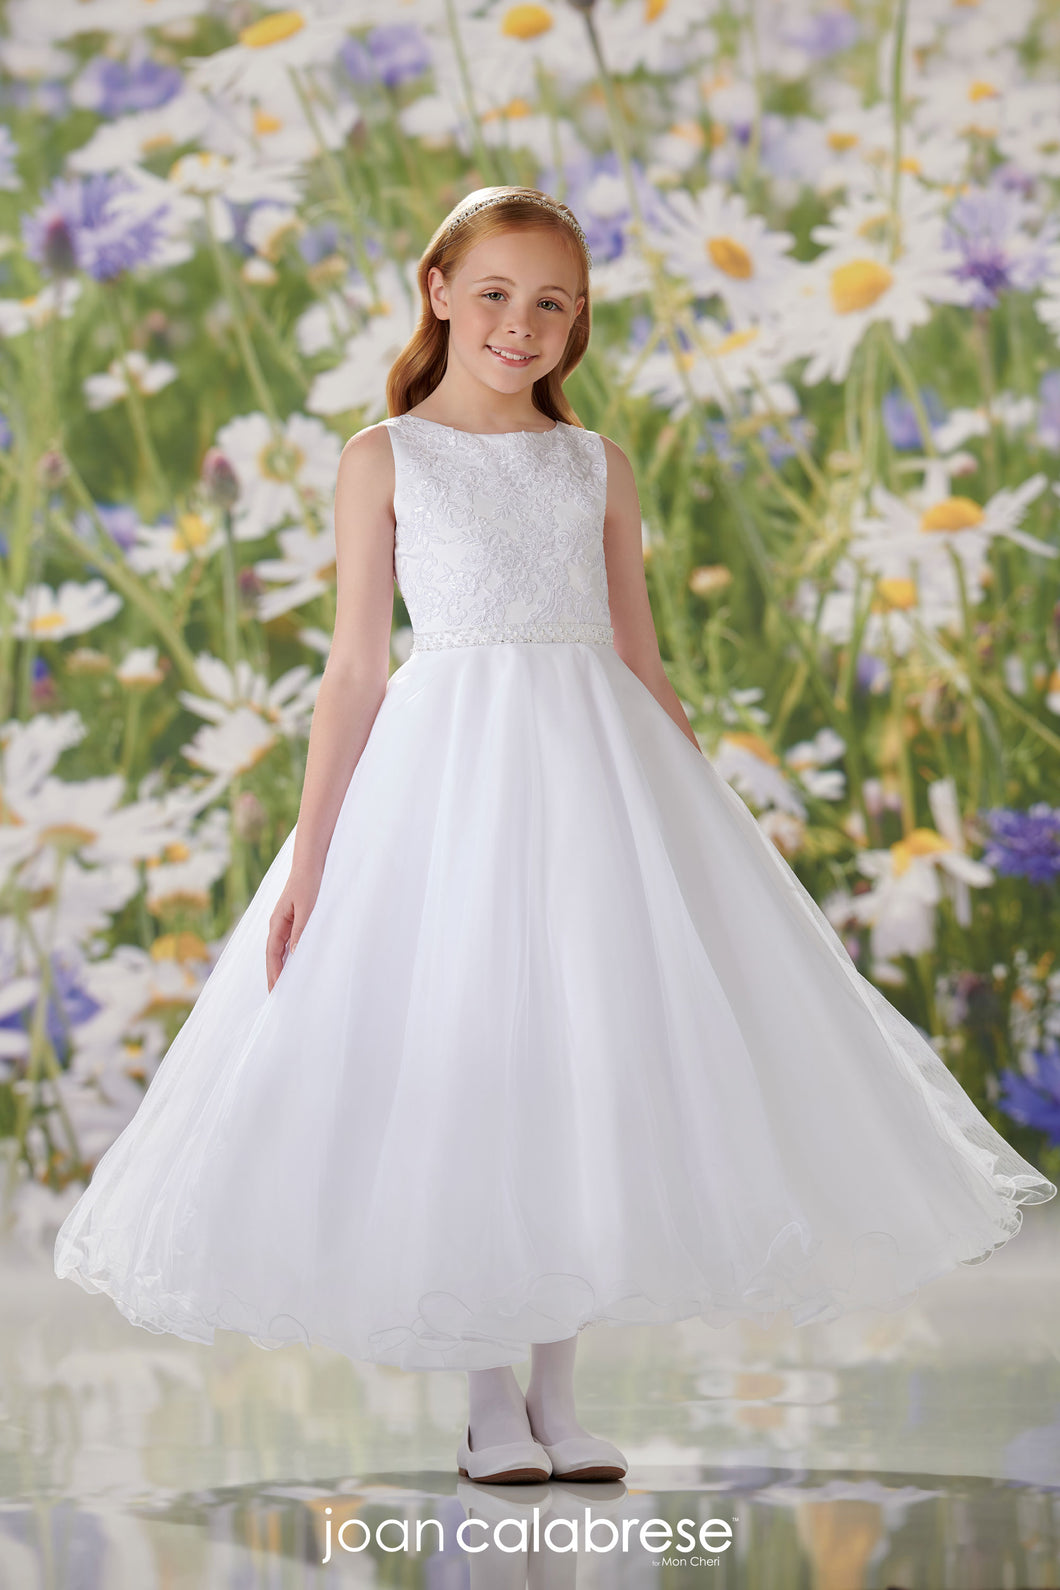 120349 Joan Calabrese Communion/Flower Girl Dress Size 7, 8X AND 10X in STOCK NOW